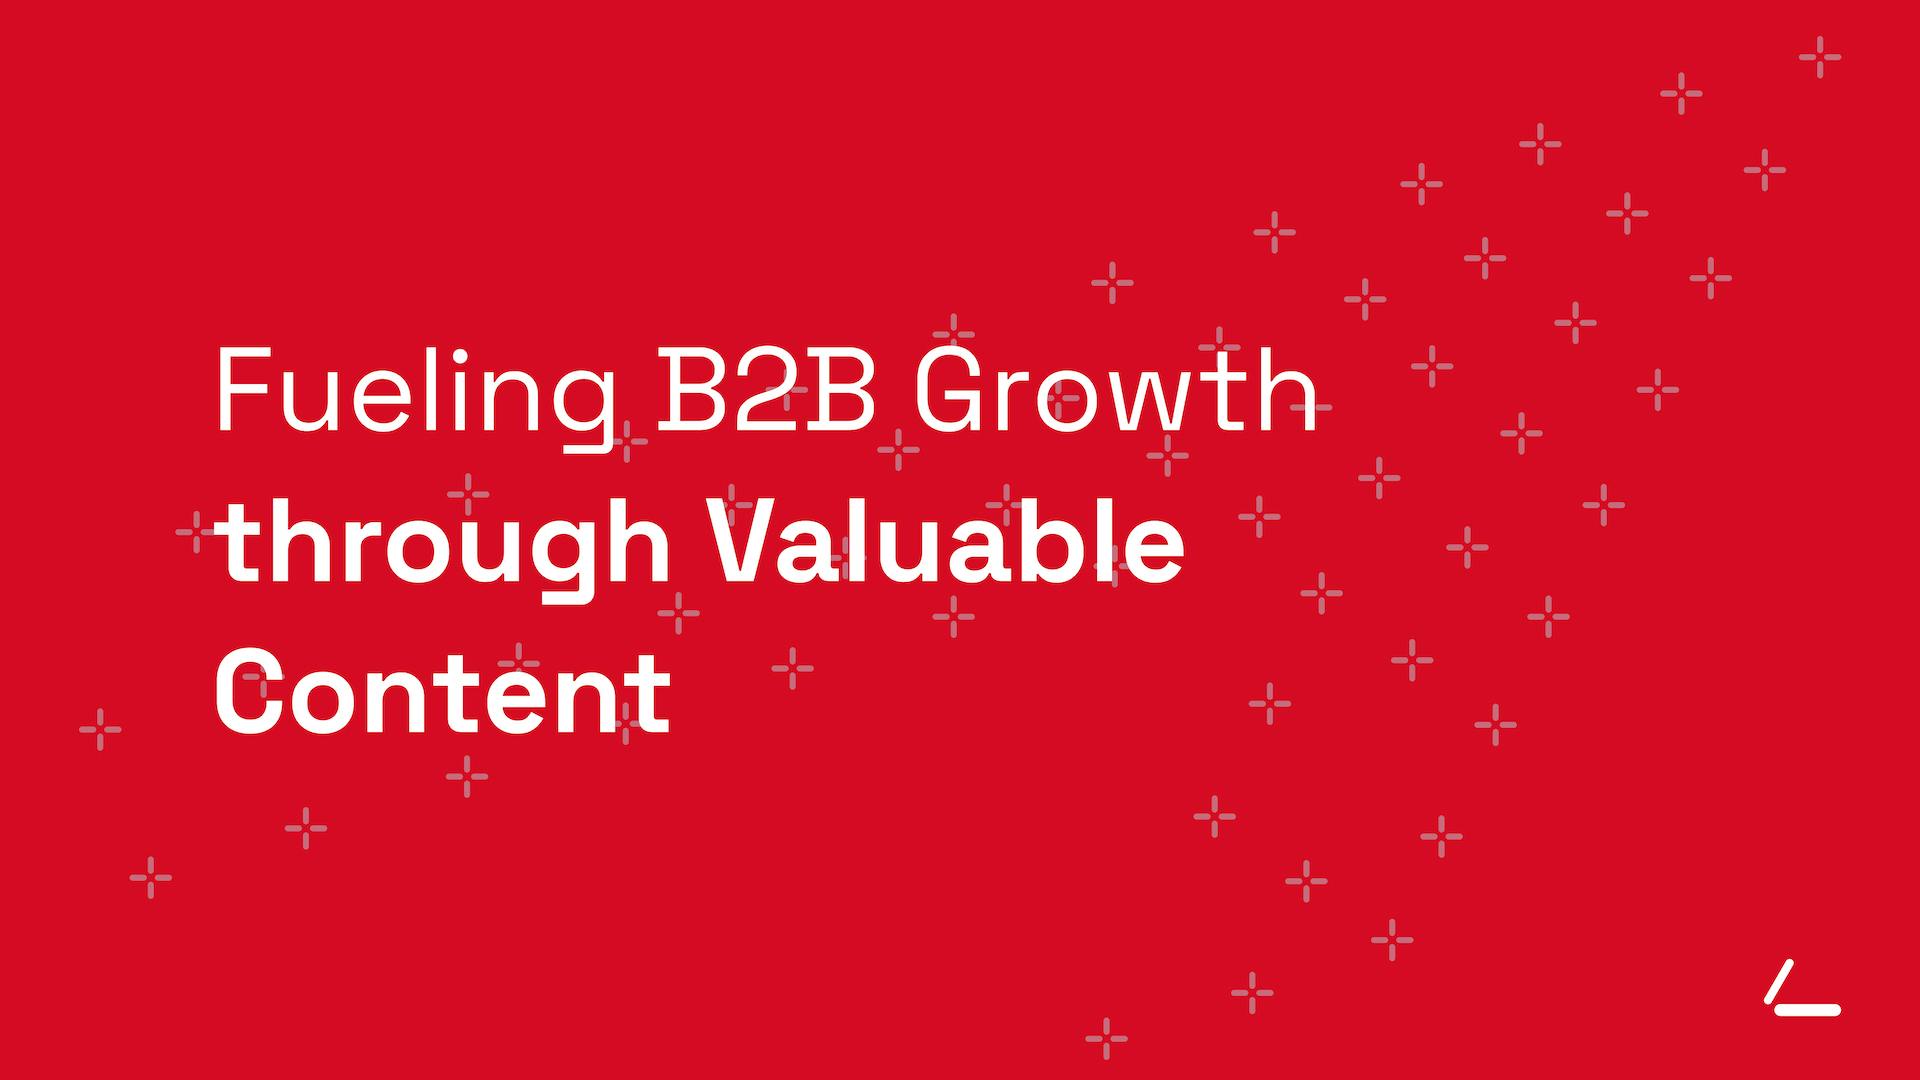 SEO Article Header - Red background with text about Fueling B2B growth through valuable content.